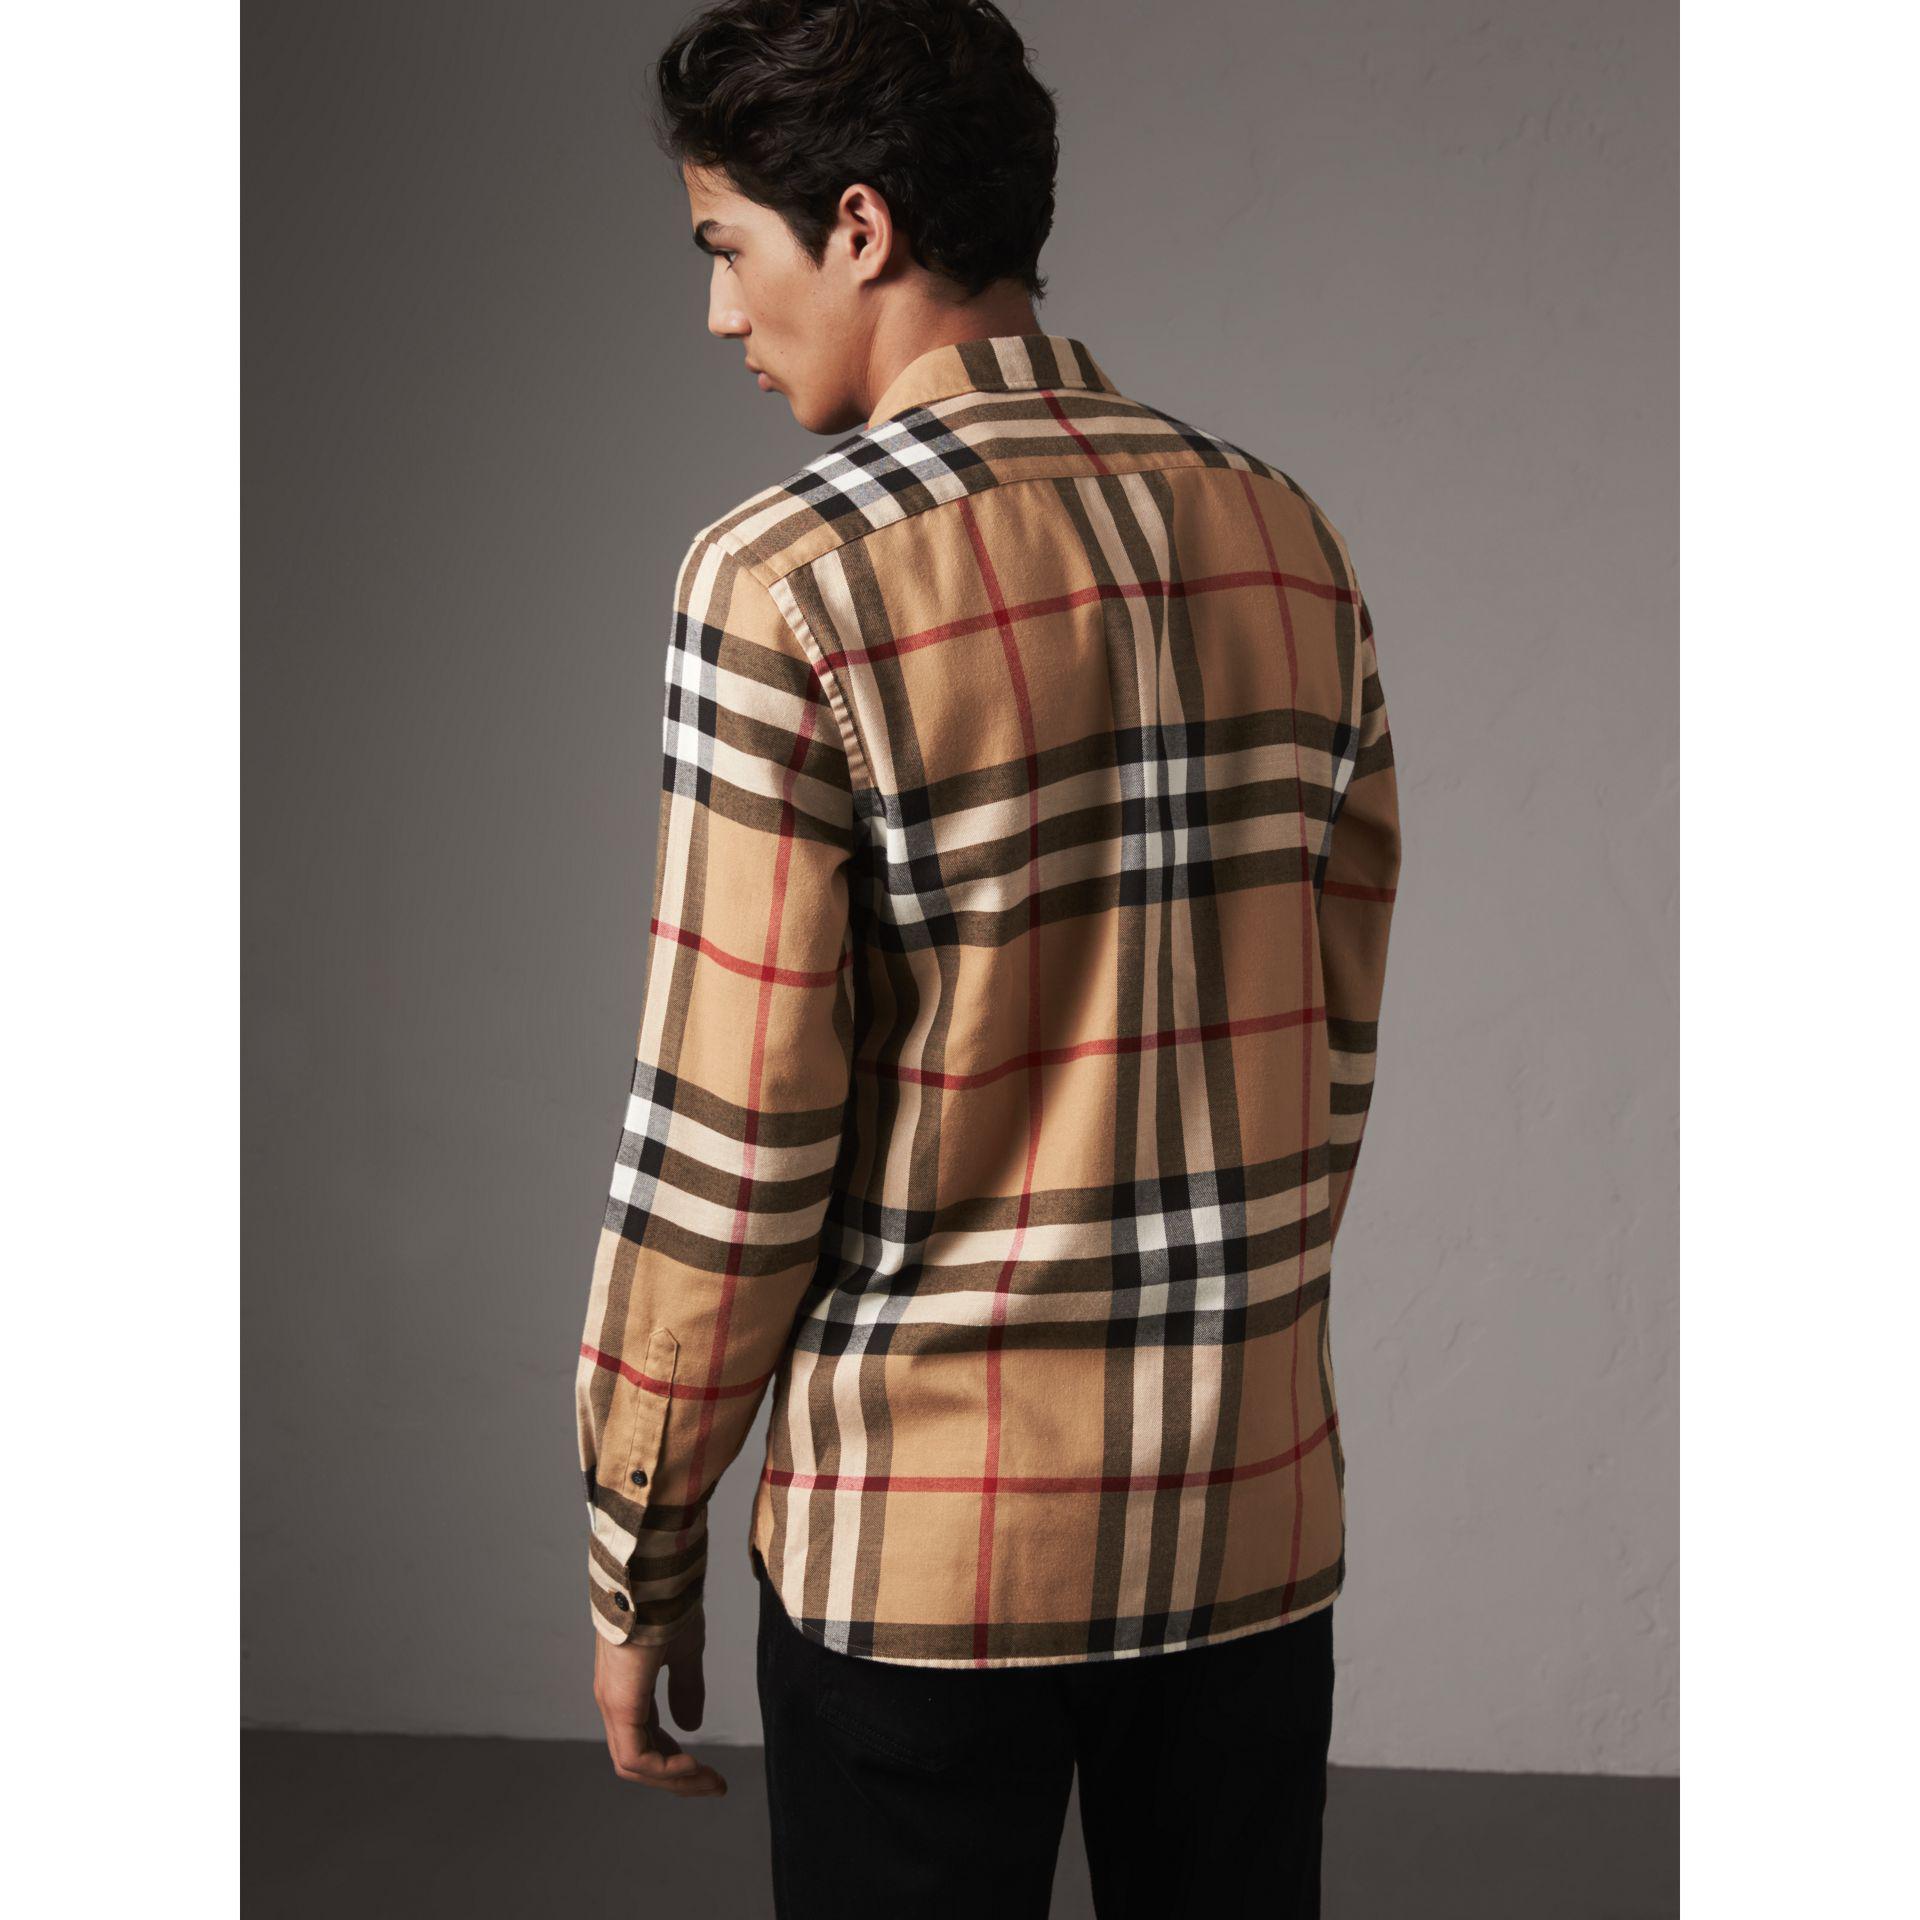 Burberry Check Cotton Flannel Shirt for Men - Lyst